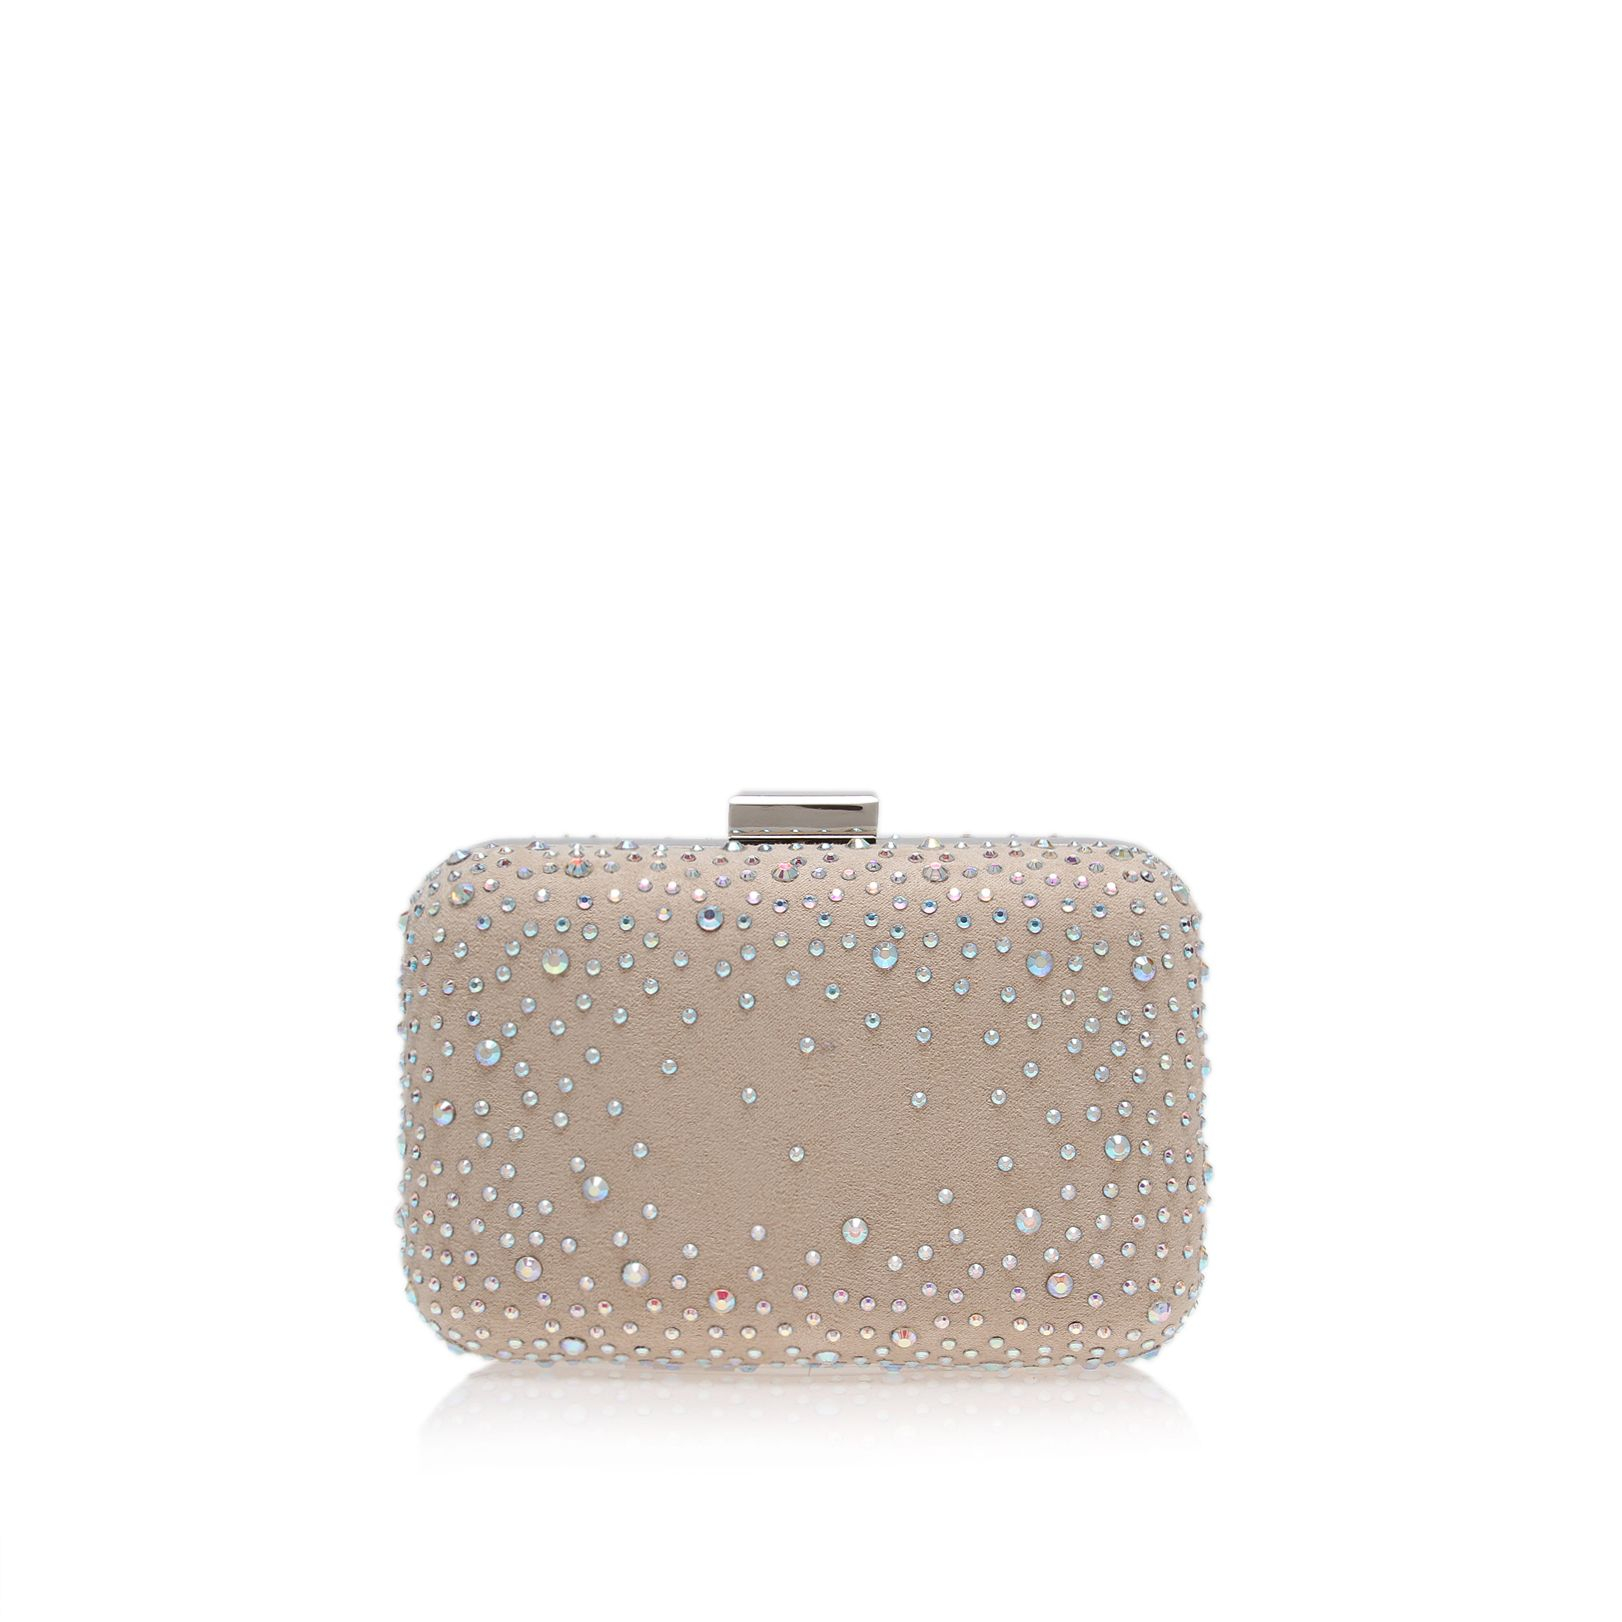 Miss Kg Hetty Clutch Bag in Nude (Natural) - Lyst